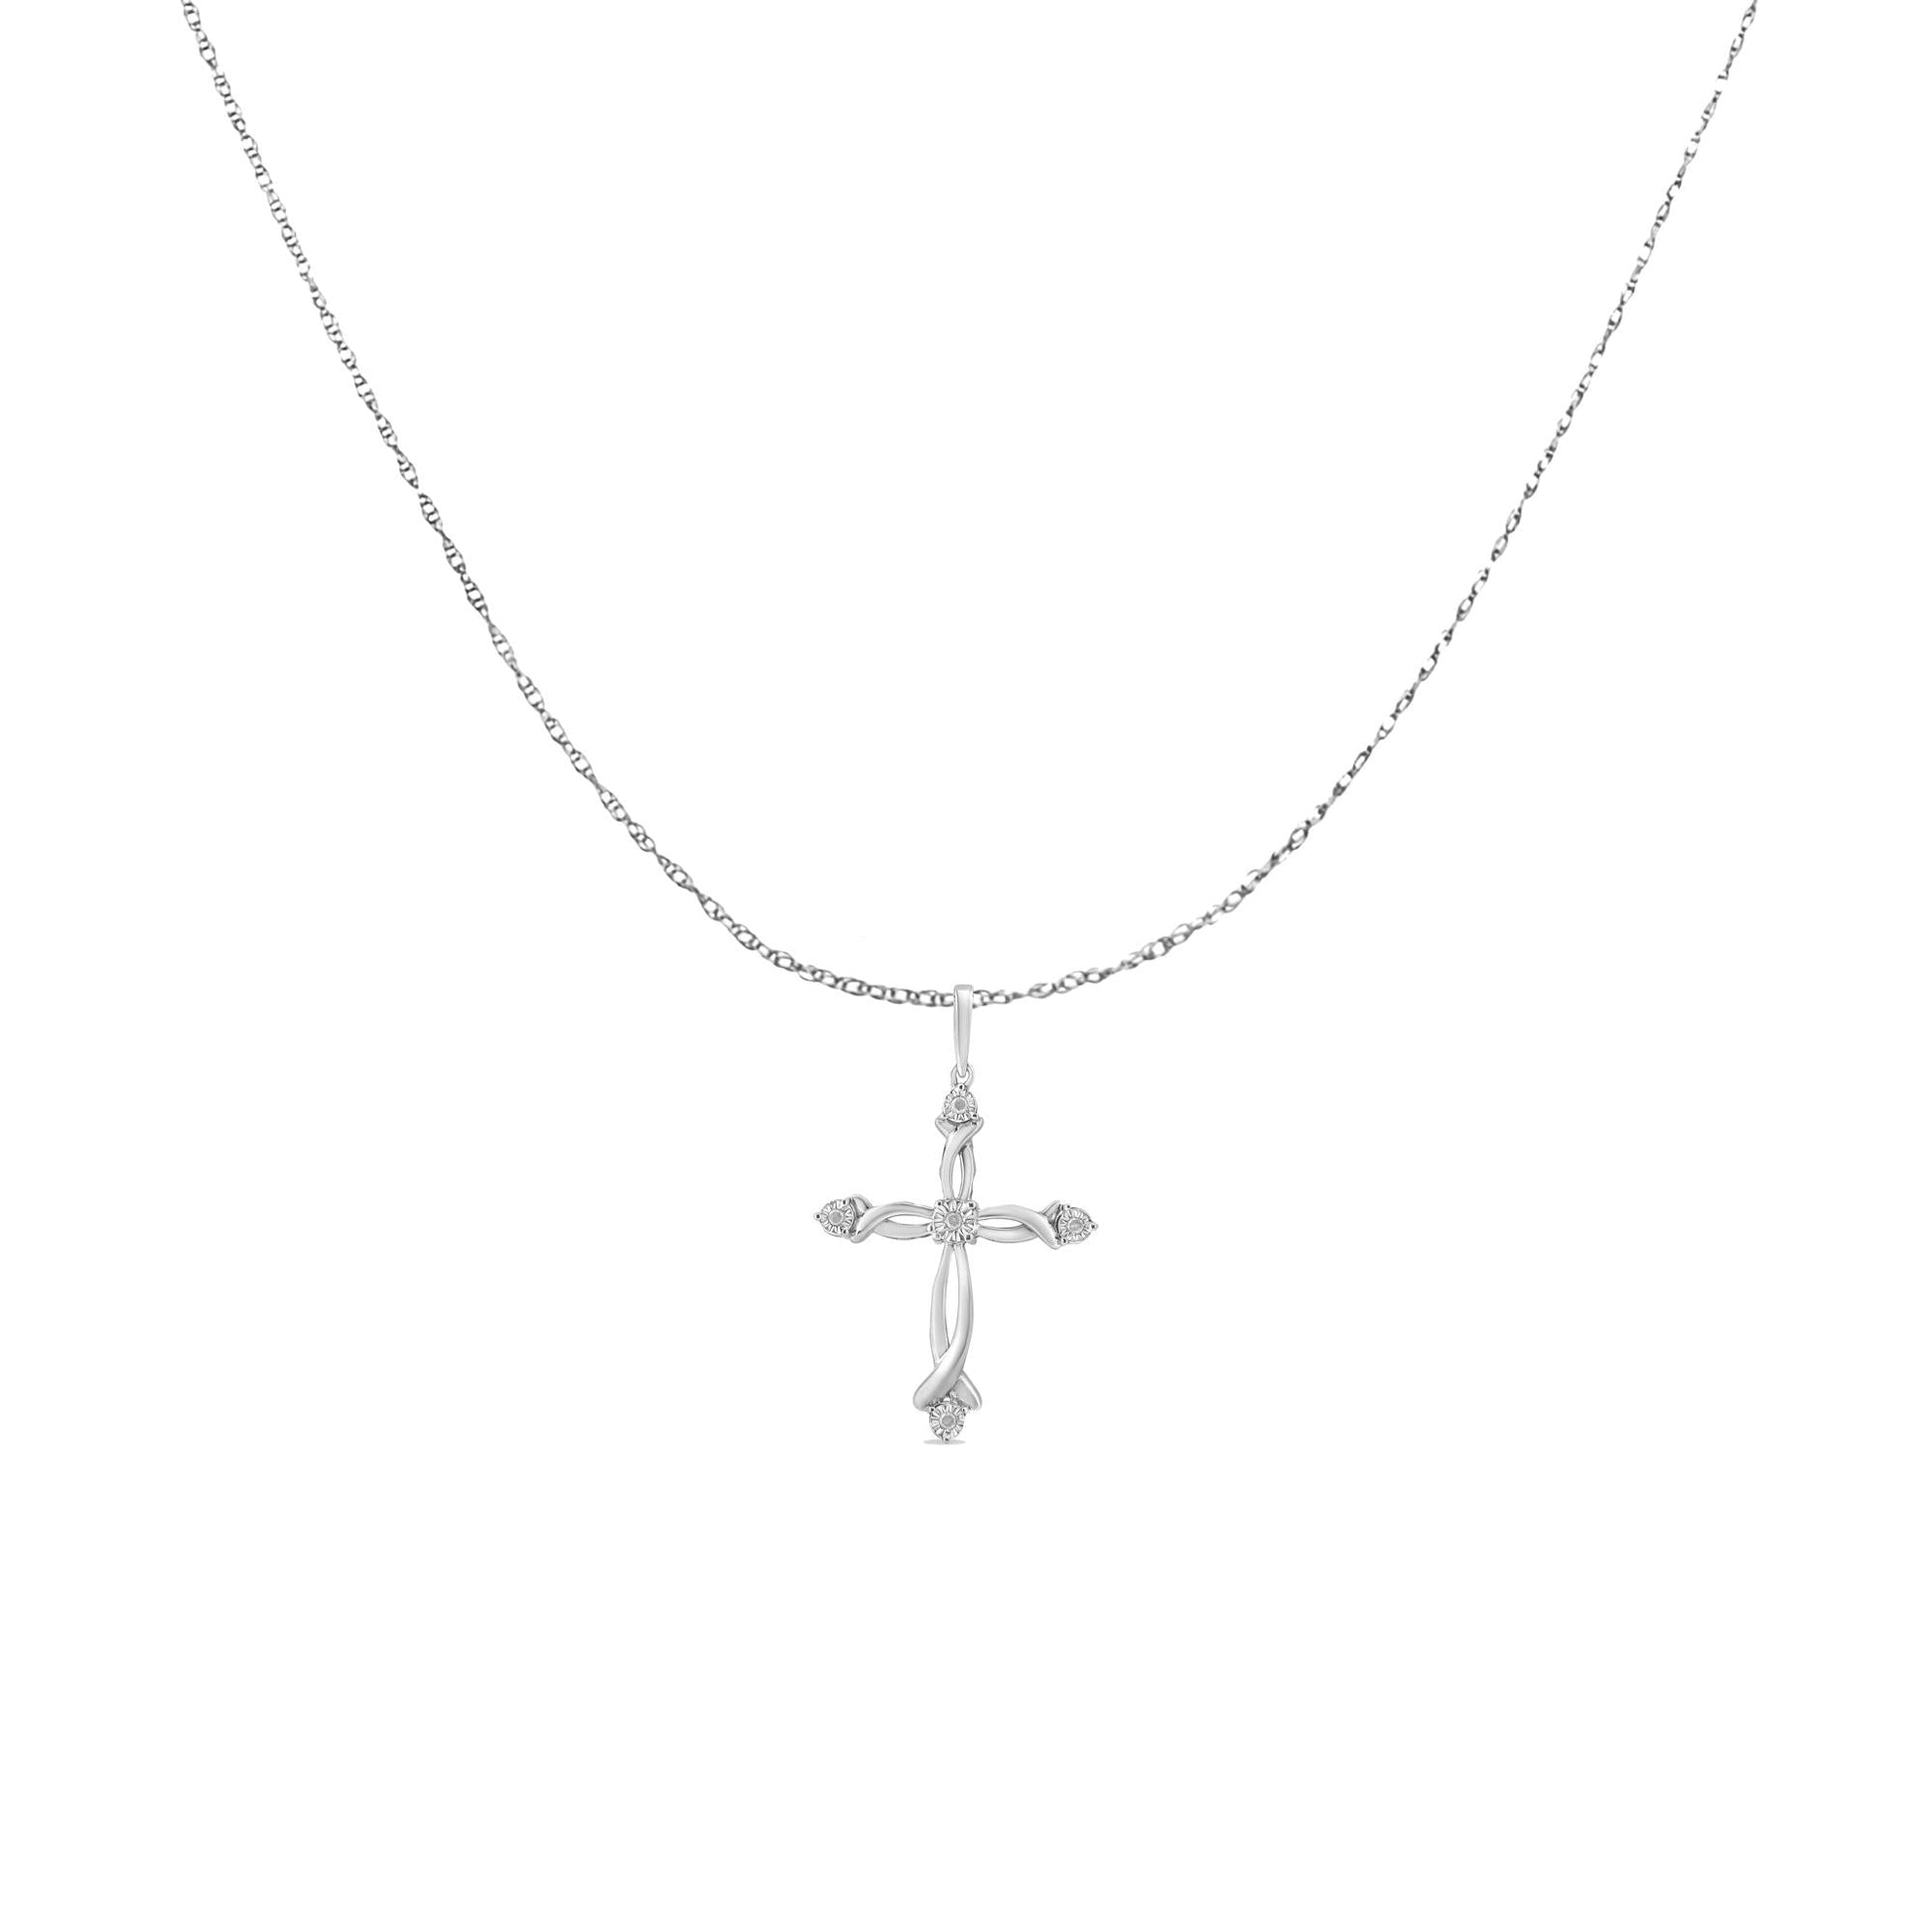 .925 Sterling Silver Round Cut Diamond Accent Cross Pendant Necklace - Desire & Hope